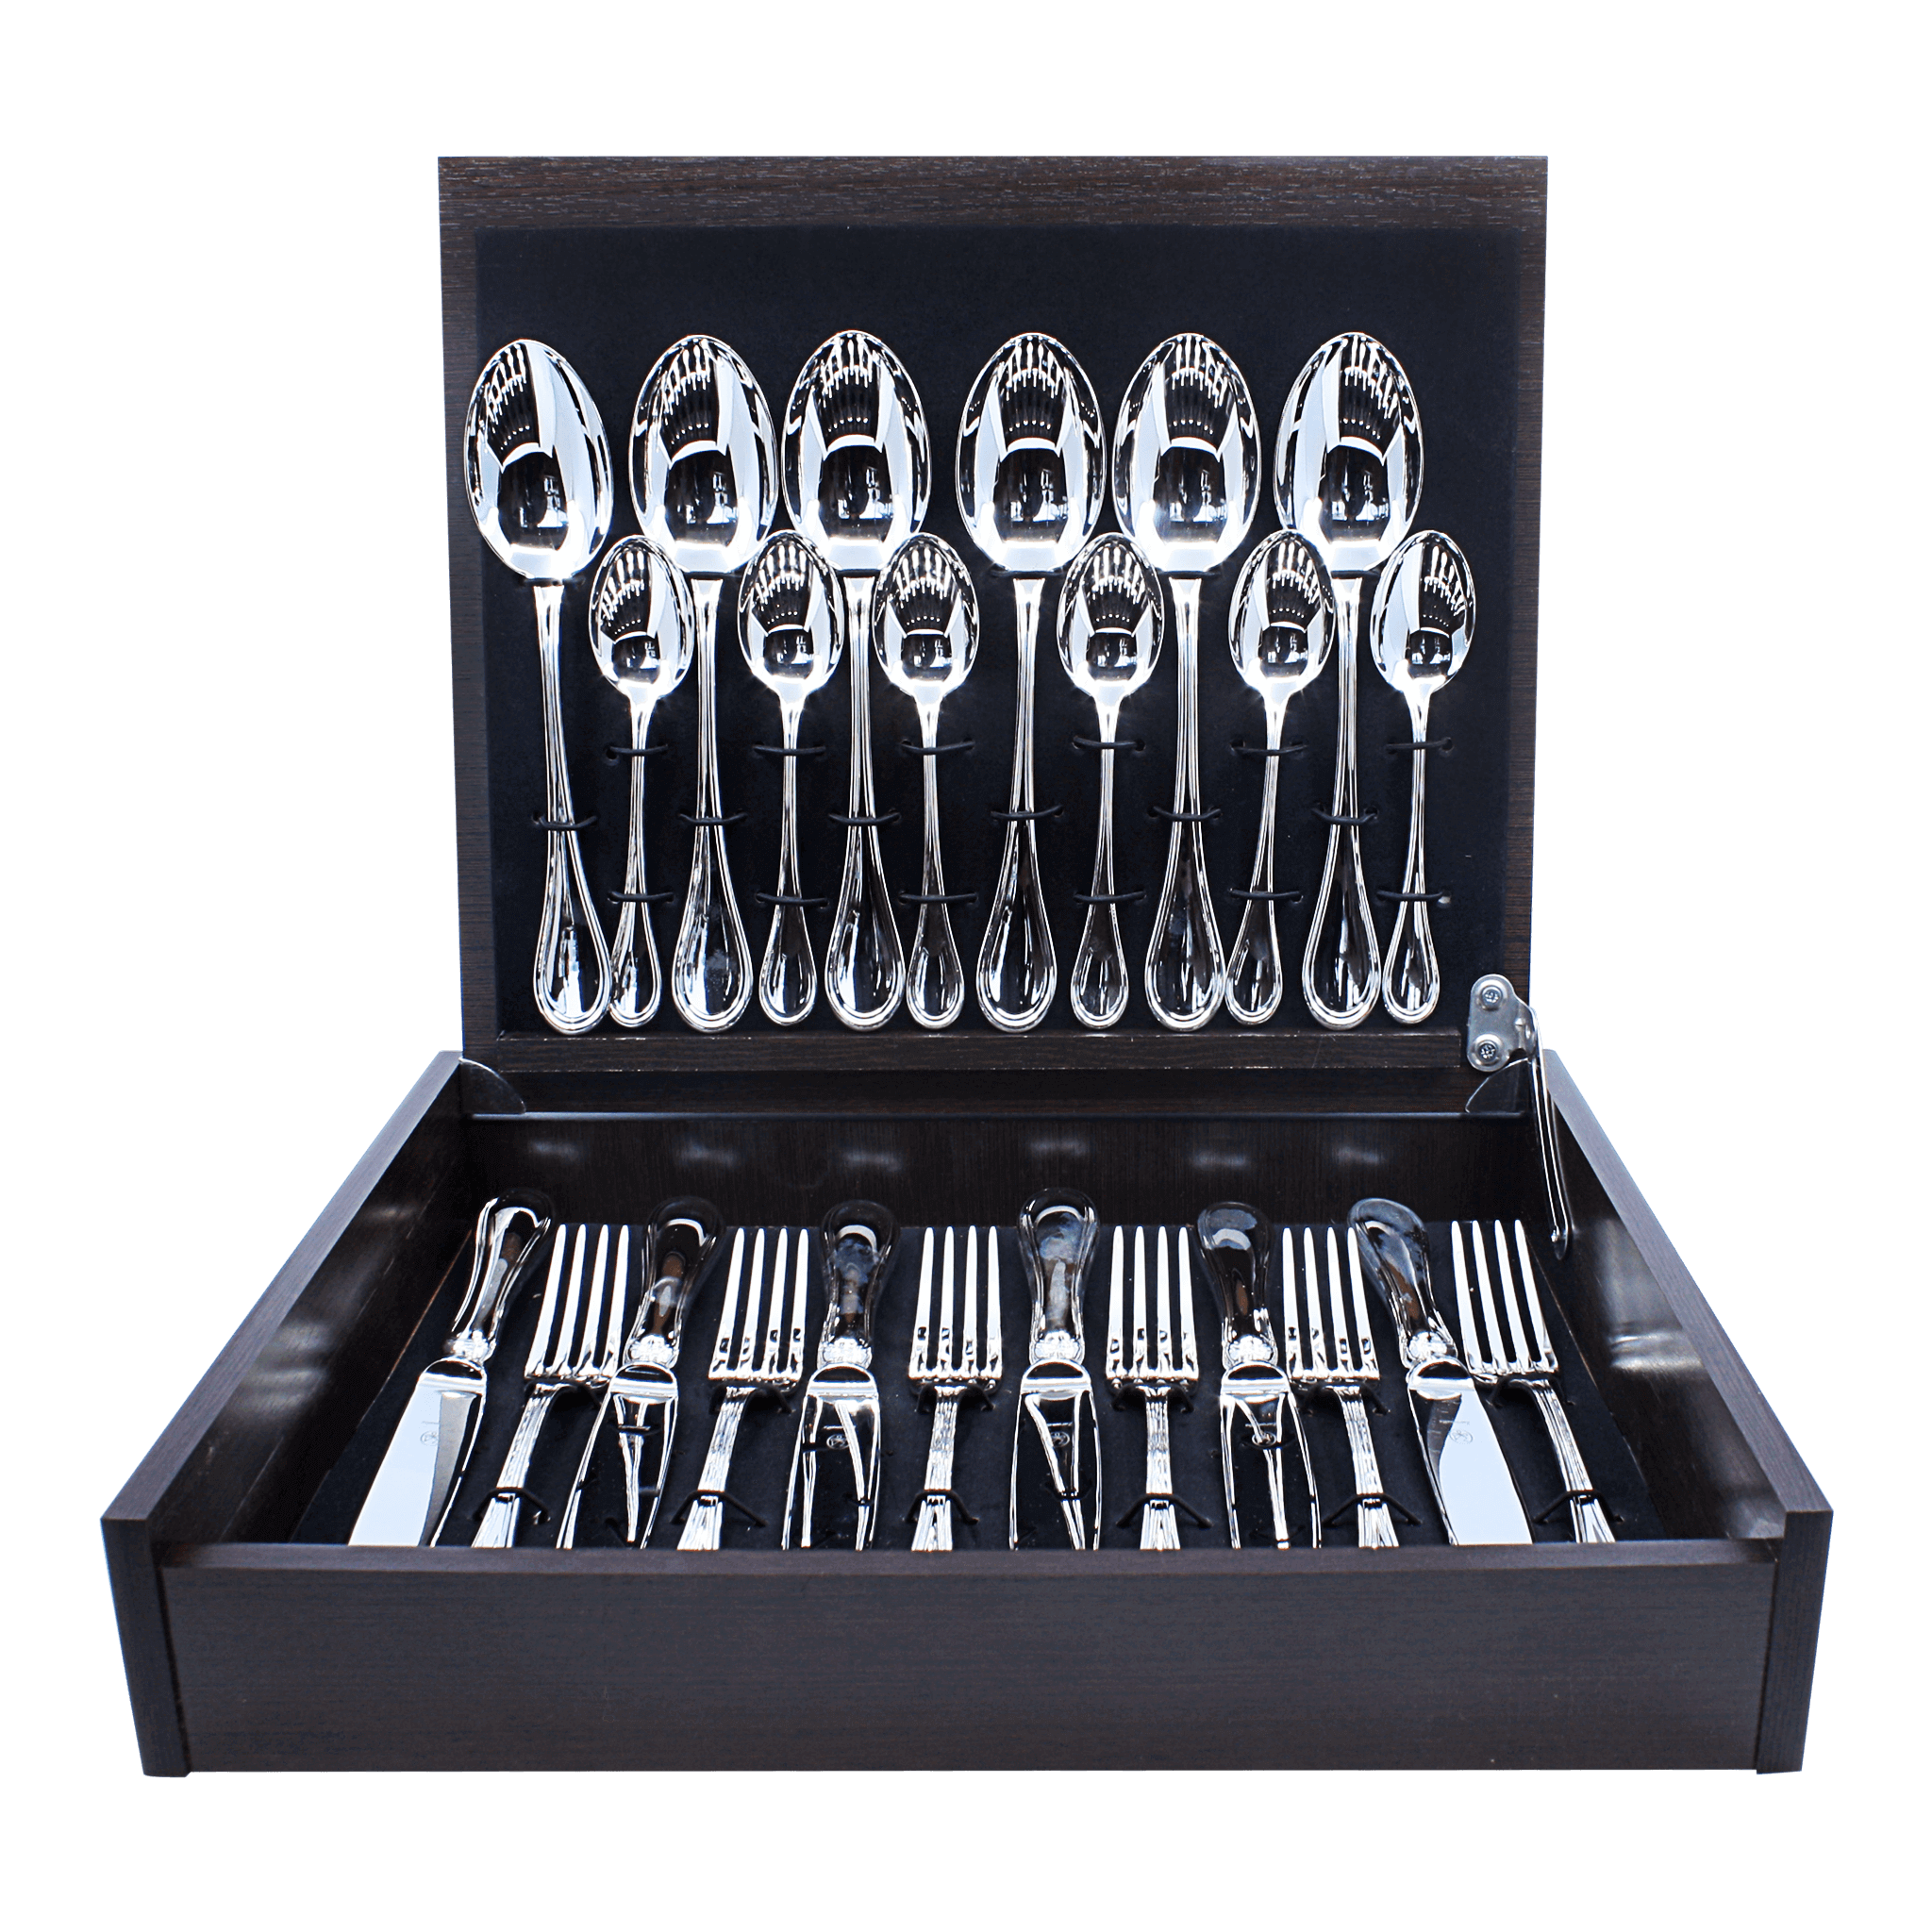 Oval plane cutlery set for 6 people - Piece By Zion Hadad